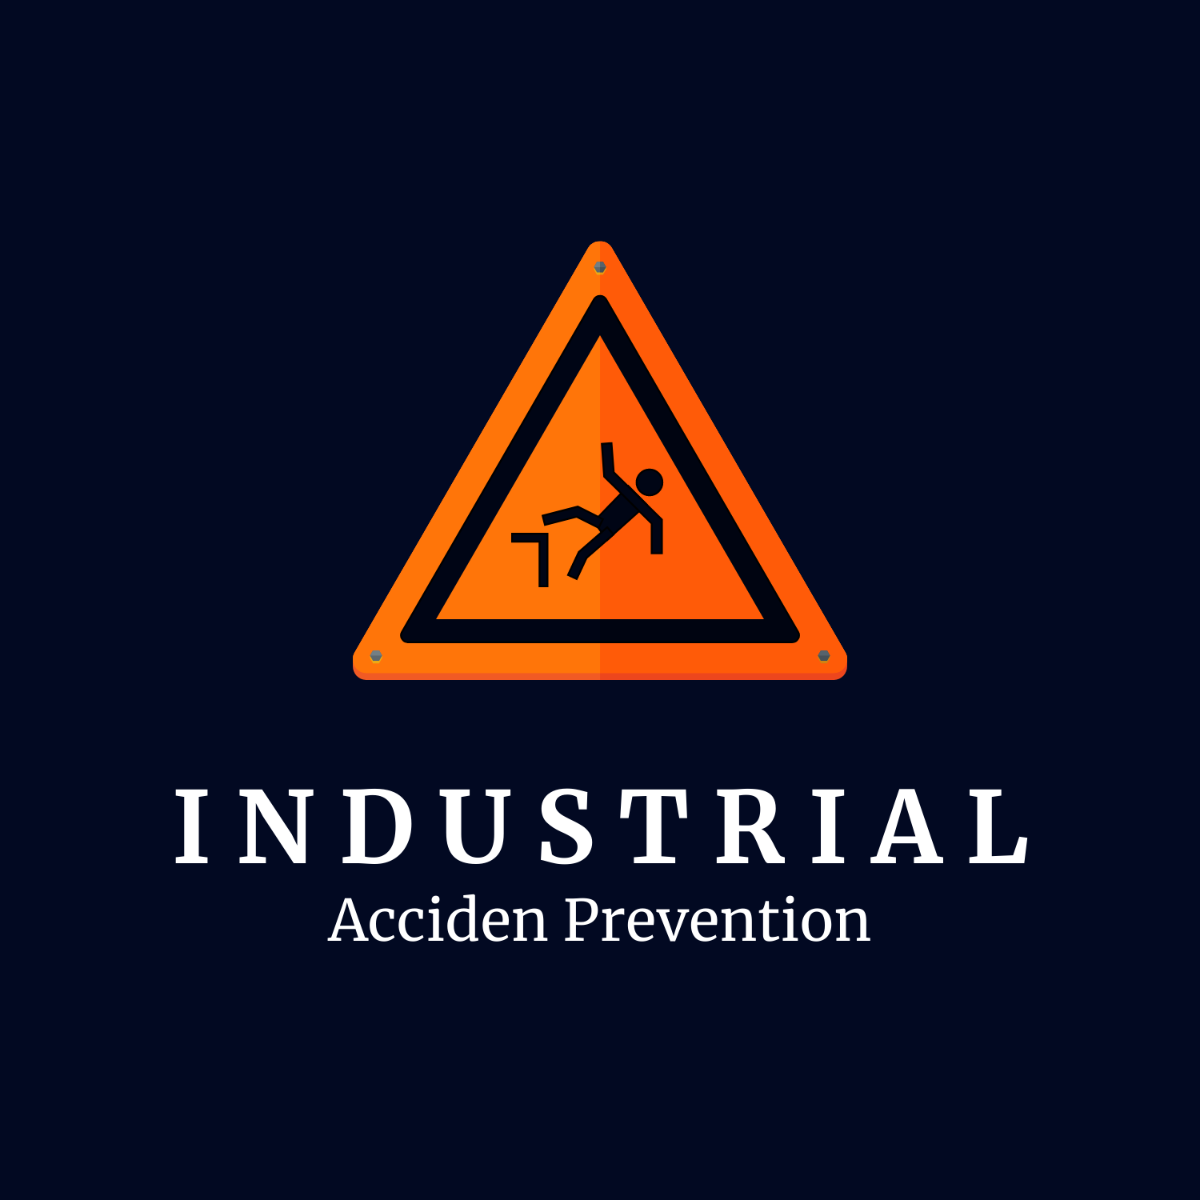 Industrial Accident Prevention Logo